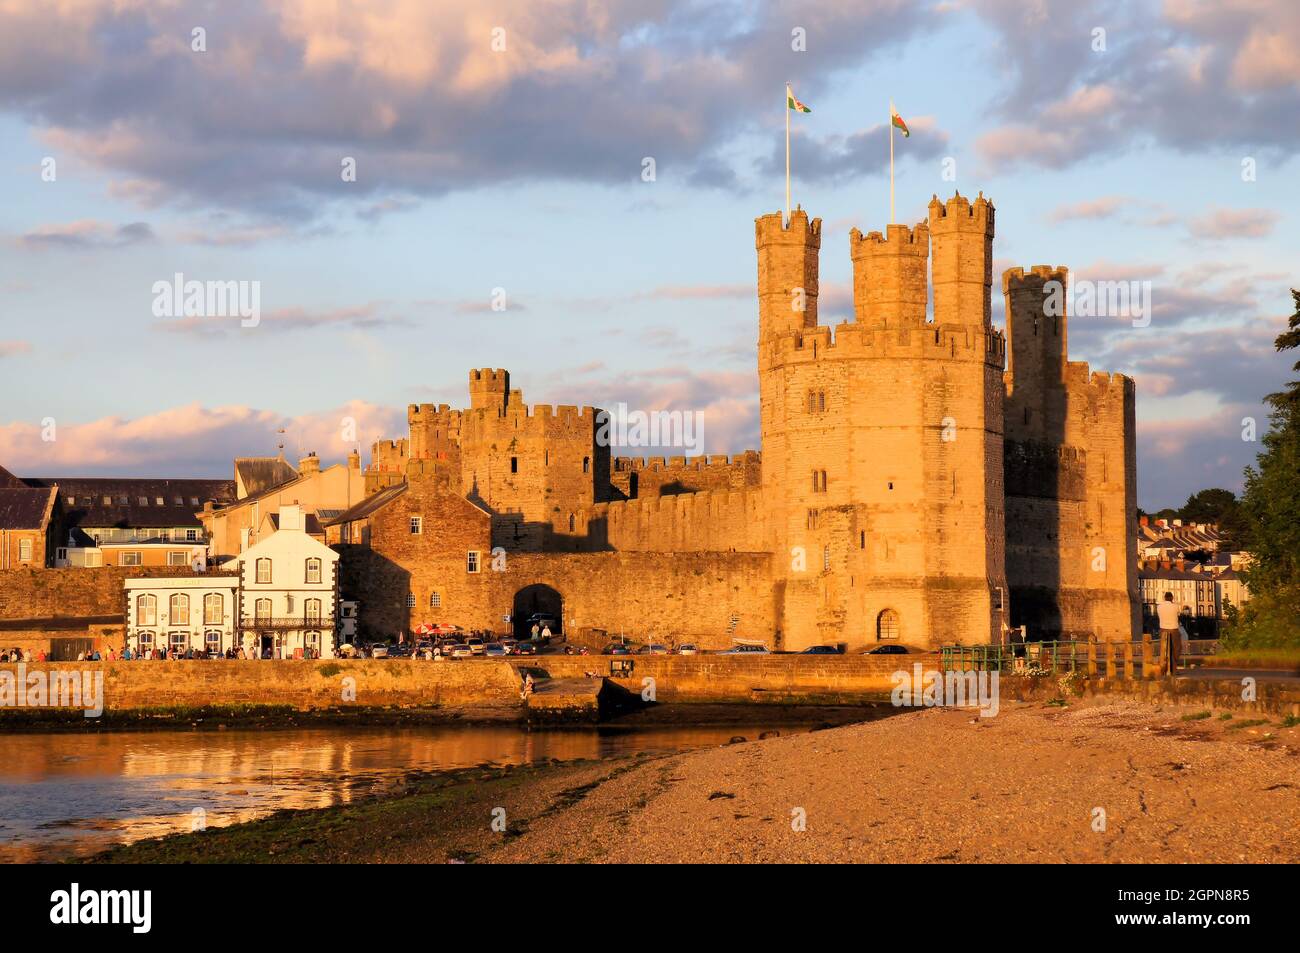 Caernarfon Castle, parts of the town and reflections in the sea (river) soon before sunset at Caernarfon Gwynedd, Wales Stock Photo